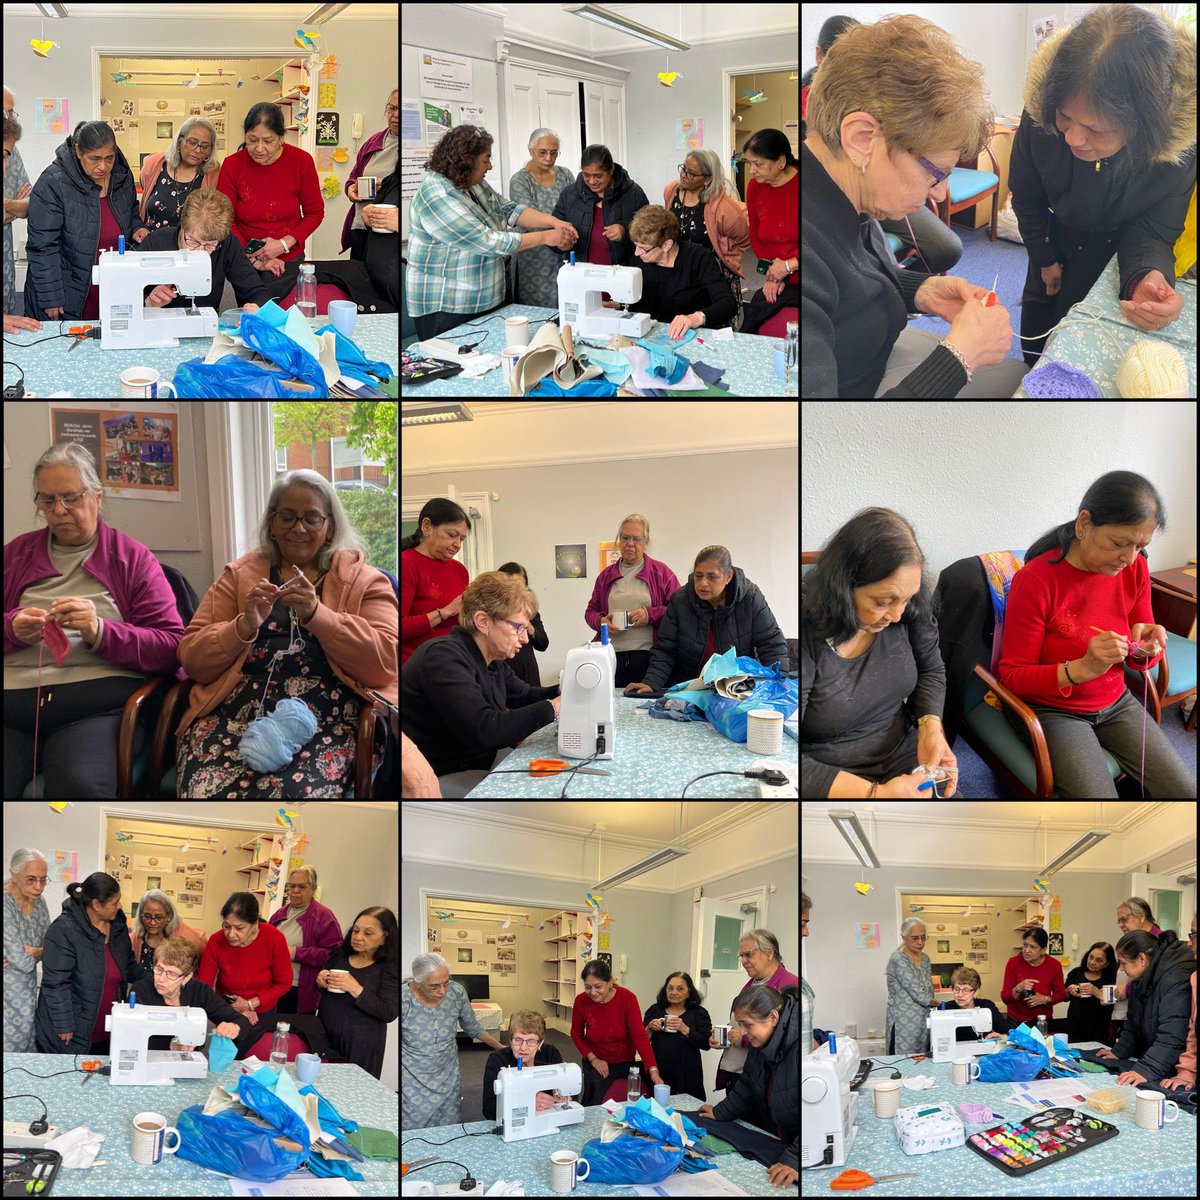 We're having so much with our EKTA sessions every Monday. Sewing ,Crocheting, having fun and making new friends. Why don't you come and join us! 12-3pm on Mondays.